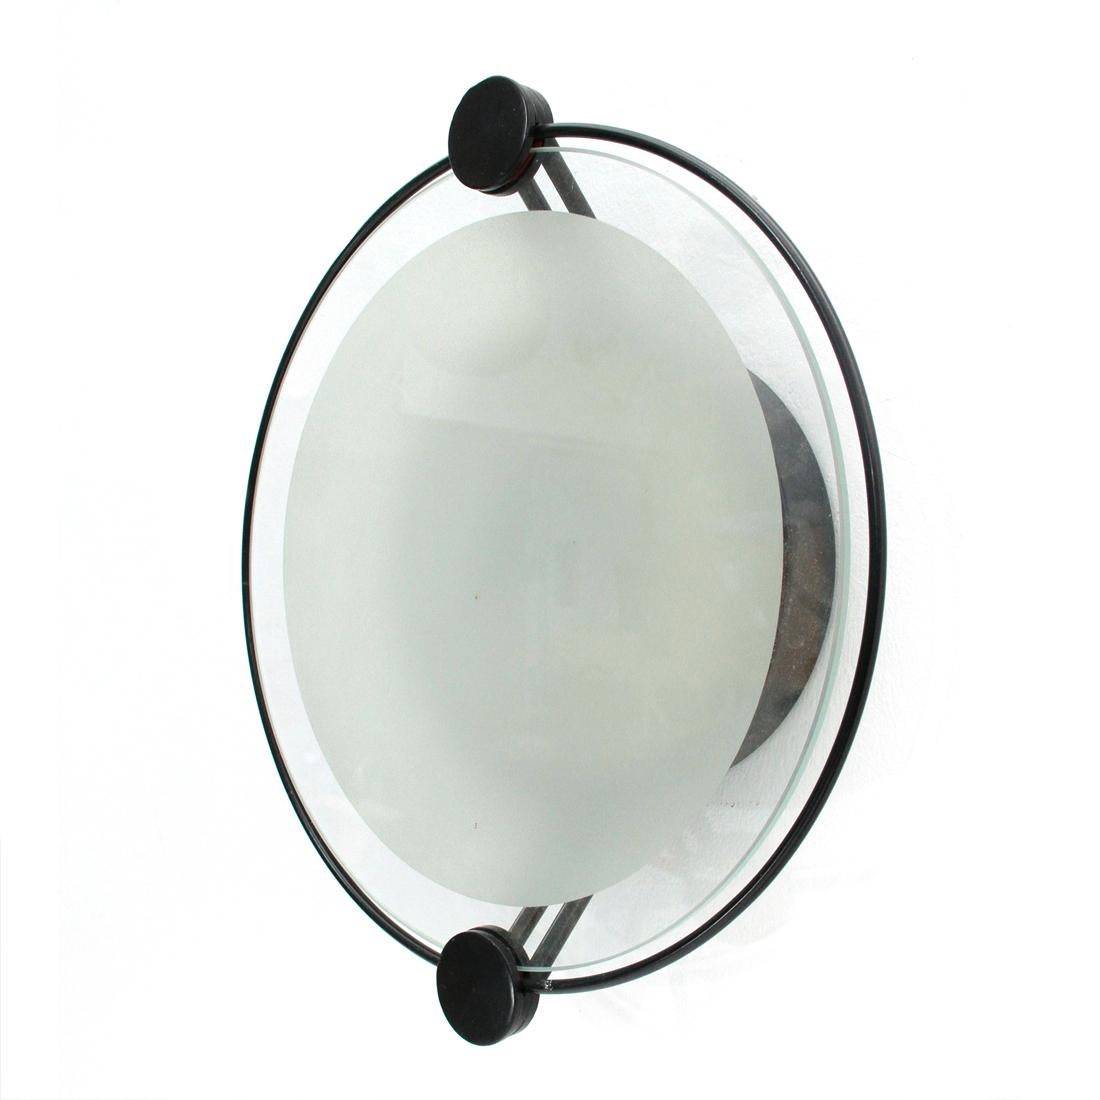 Applique or ceiling lamp produced by Artemide in the 1980s, designed by Michele De Lucchi.
Black painted metal structure.
Circular diffuser in sandblasted glass and transparent glass frame.
Good general conditions, some signs due to normal use